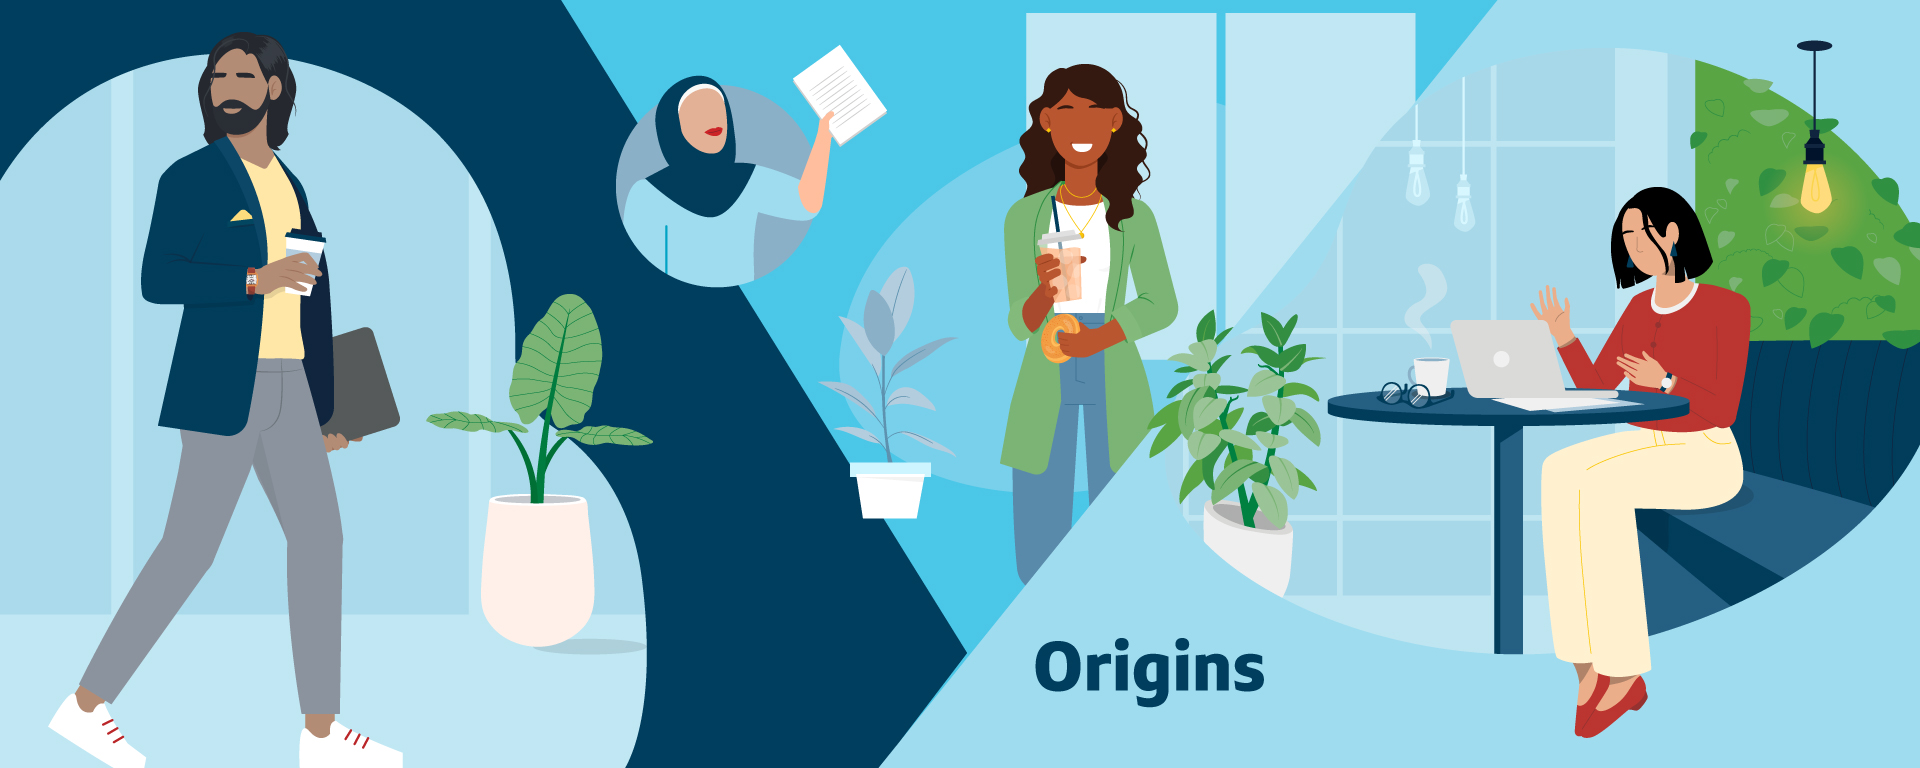 An illustrated collage of different Capital One associates with the title "Origins" at the bottom